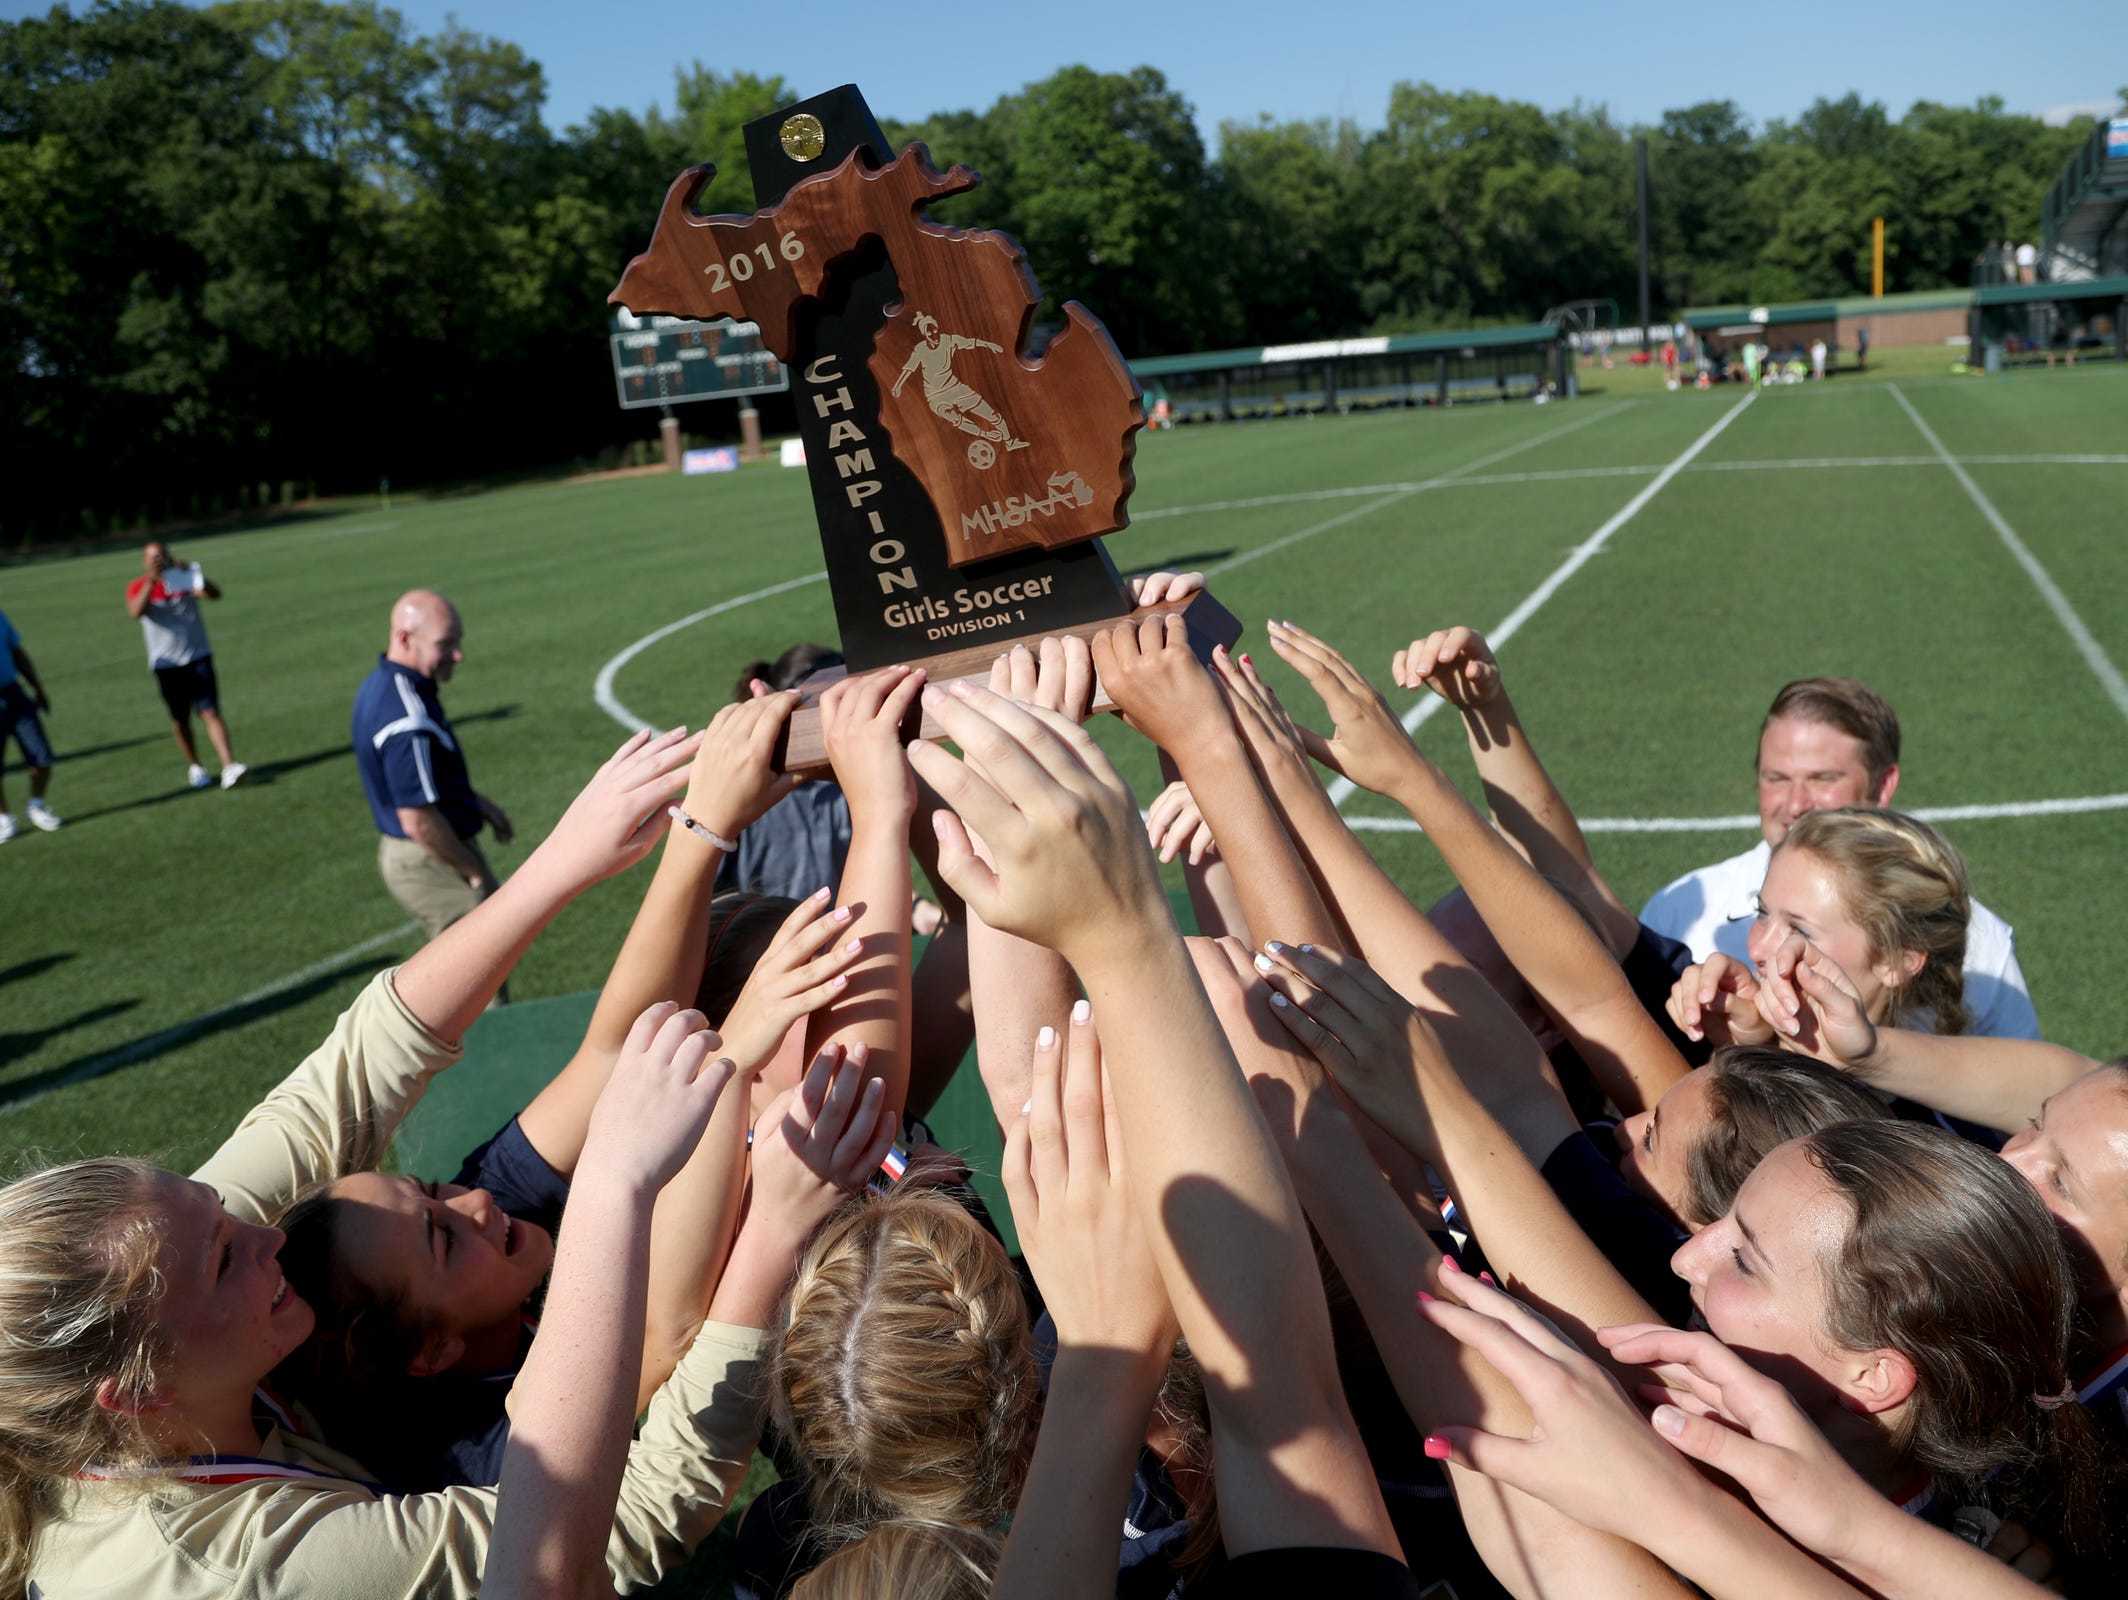 Rochester Hills Stoney Creek celebrates at mid field with the winners trophy after their game versus Canton on Friday, June 17, 2016 at the MHSAA girls Division 1 soccer finals at Michigan State University in East Lansing, Michigan. Rochester Hills Stoney Creek won the game 1-0 on a penalty kick. Eric Seals/Detroit Free Press